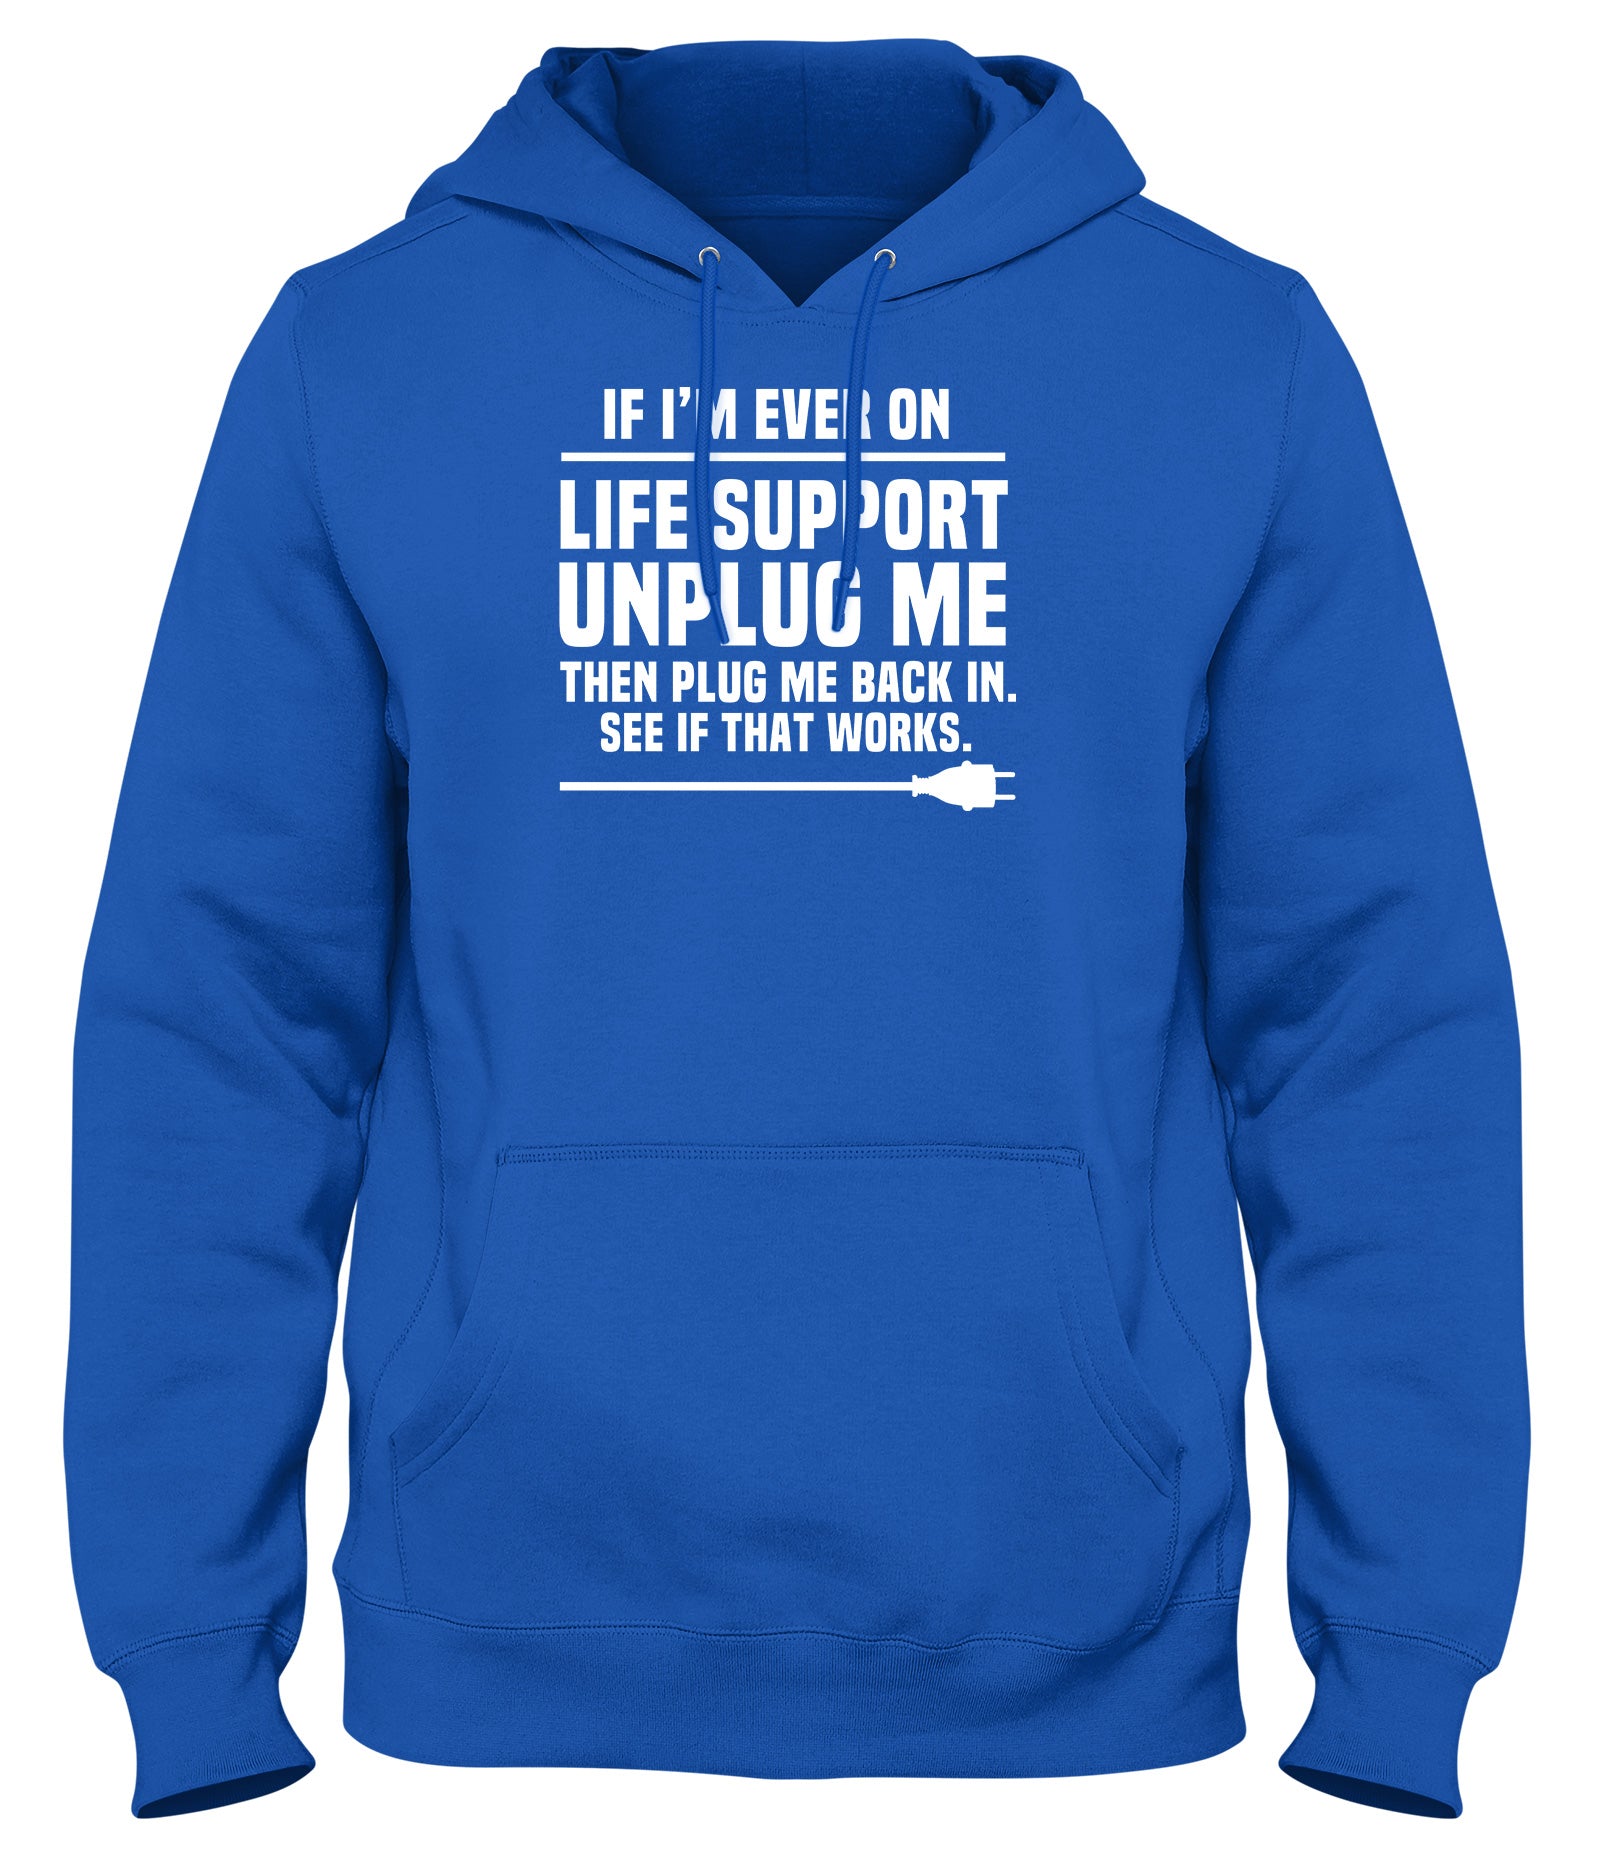 IF I'M EVER ON LIFE SUPPORT UNPLUG ME AND PLUG ME BACK IN SEE IF THAT WORKS MENS WOMENS LADIES UNISEX FUNNY SLOGAN HOODIE